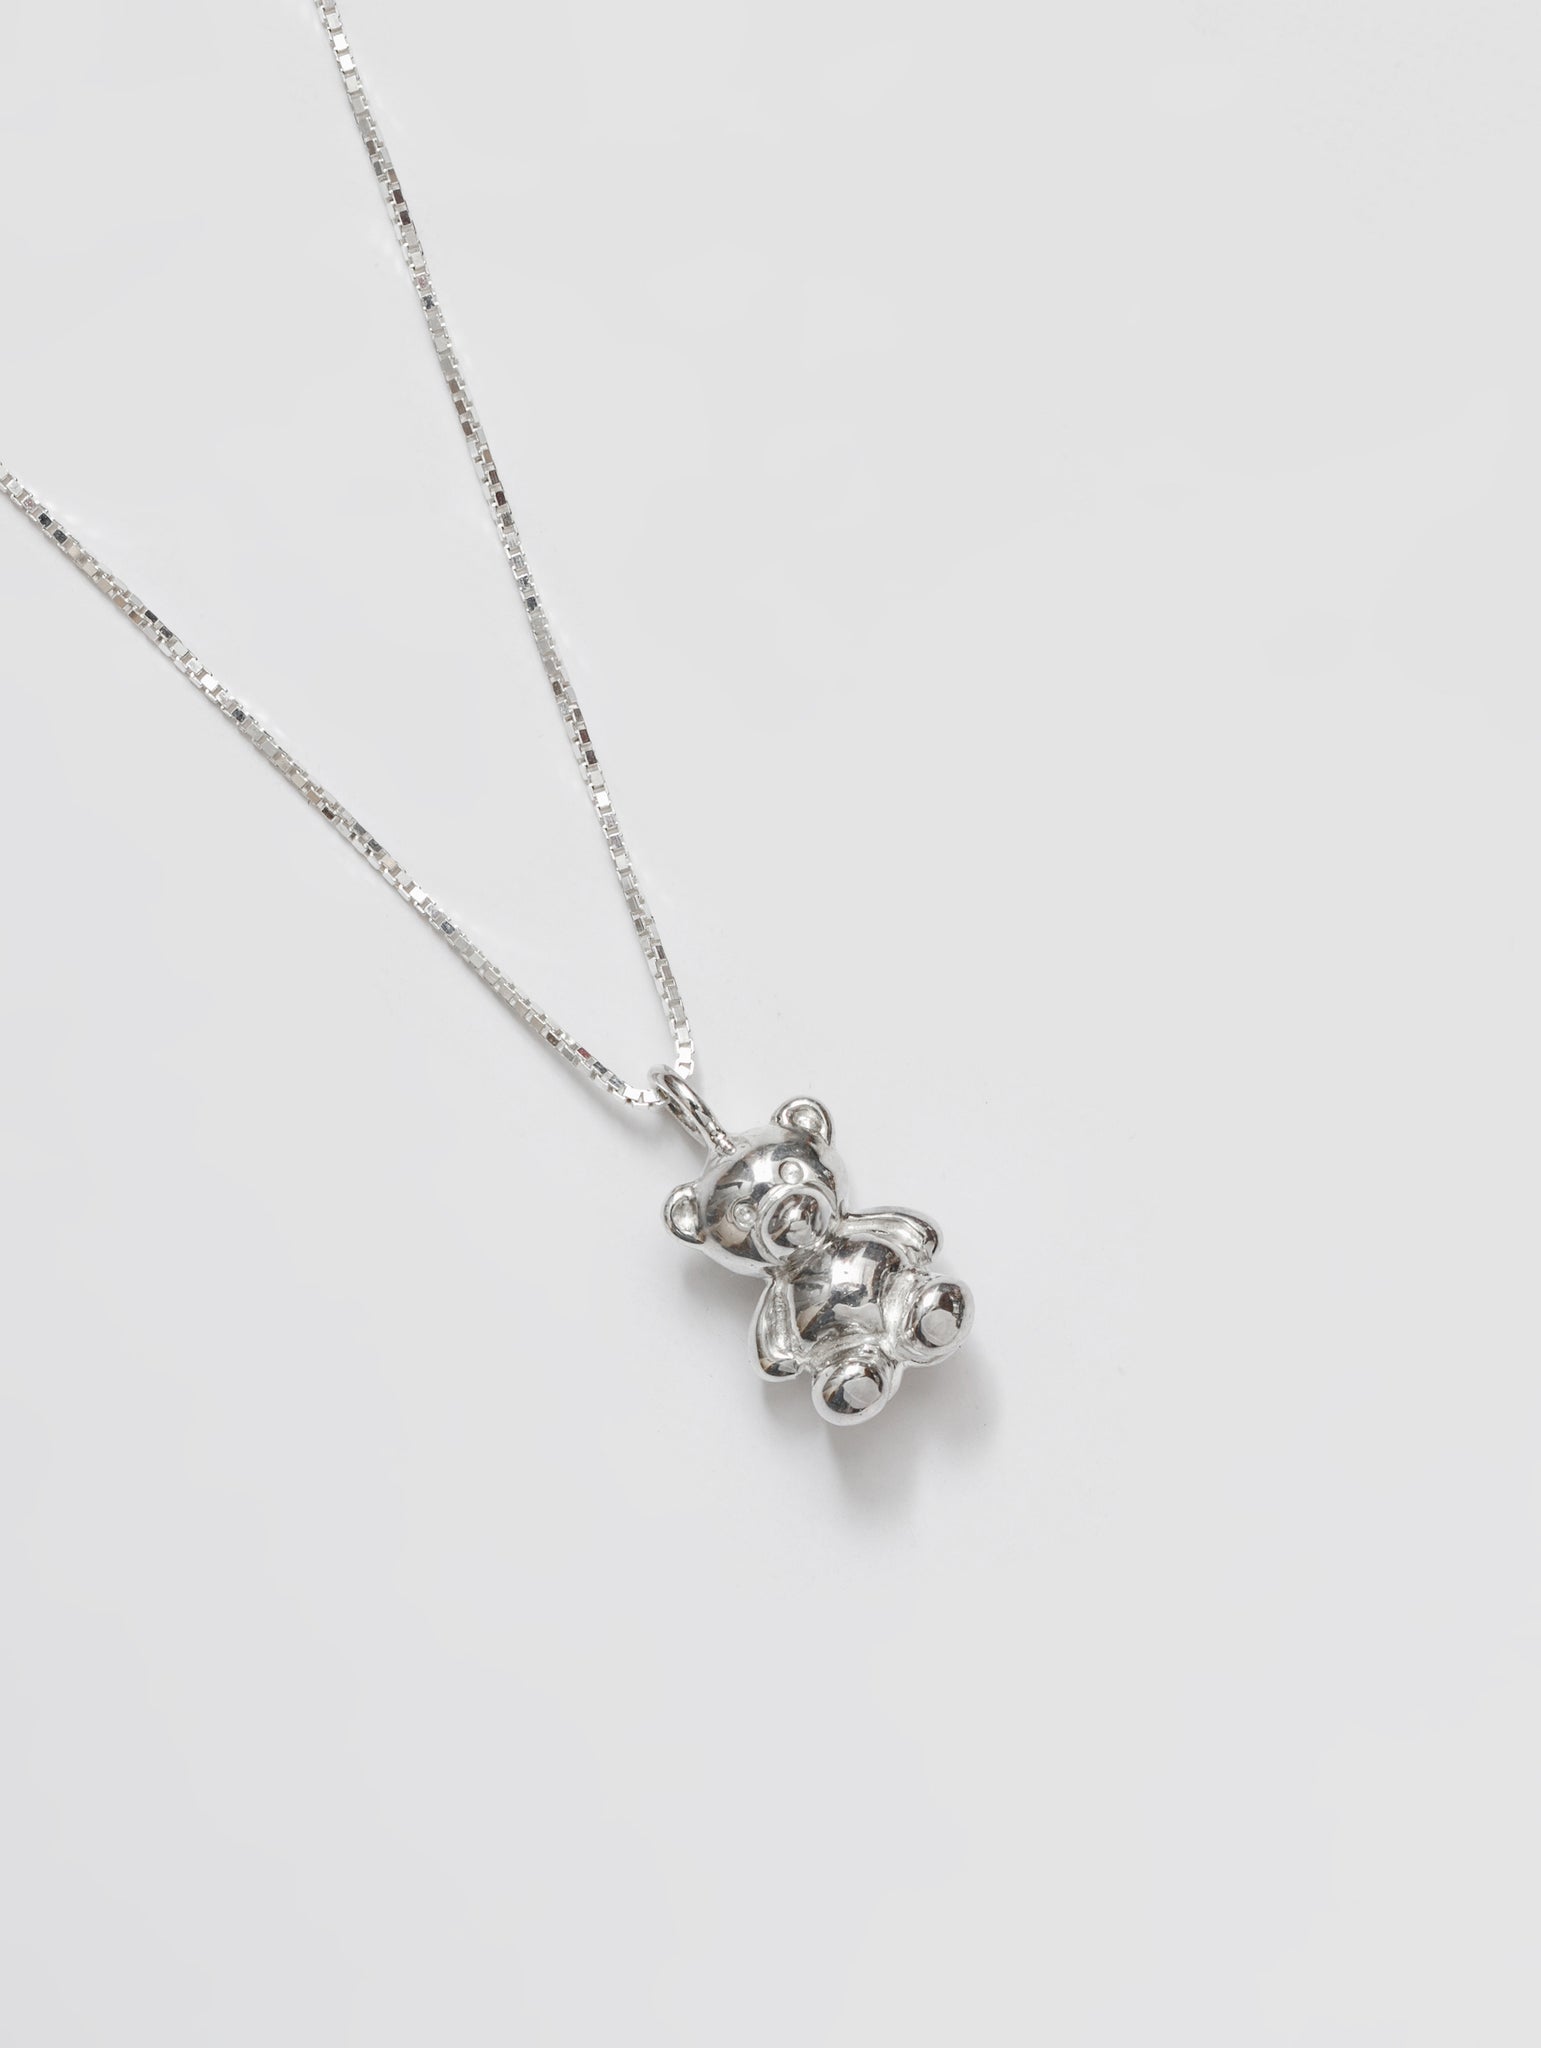 Wolf Circus Teddy Bear Charm Pendant Necklace in Sterling Silver-Necklaces-wolfcircus.com